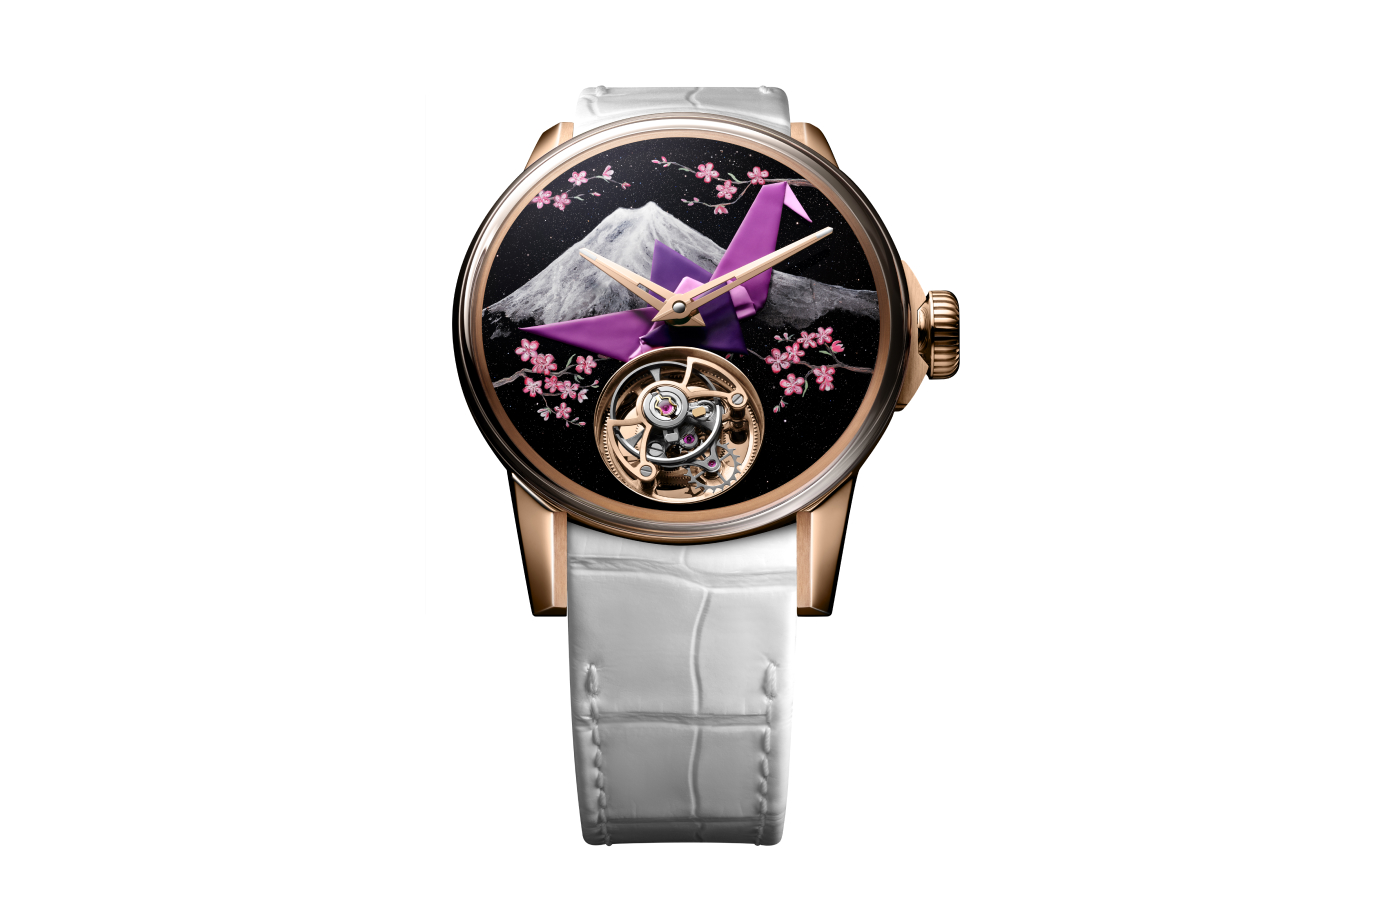 Louis Moinet Around the World Tokyo watch dial featuring an origami crane made from a piece of metallic paper, hand-painted cherry blossoms and Mount Fuji, against a starry-spangled aventurine backdrop